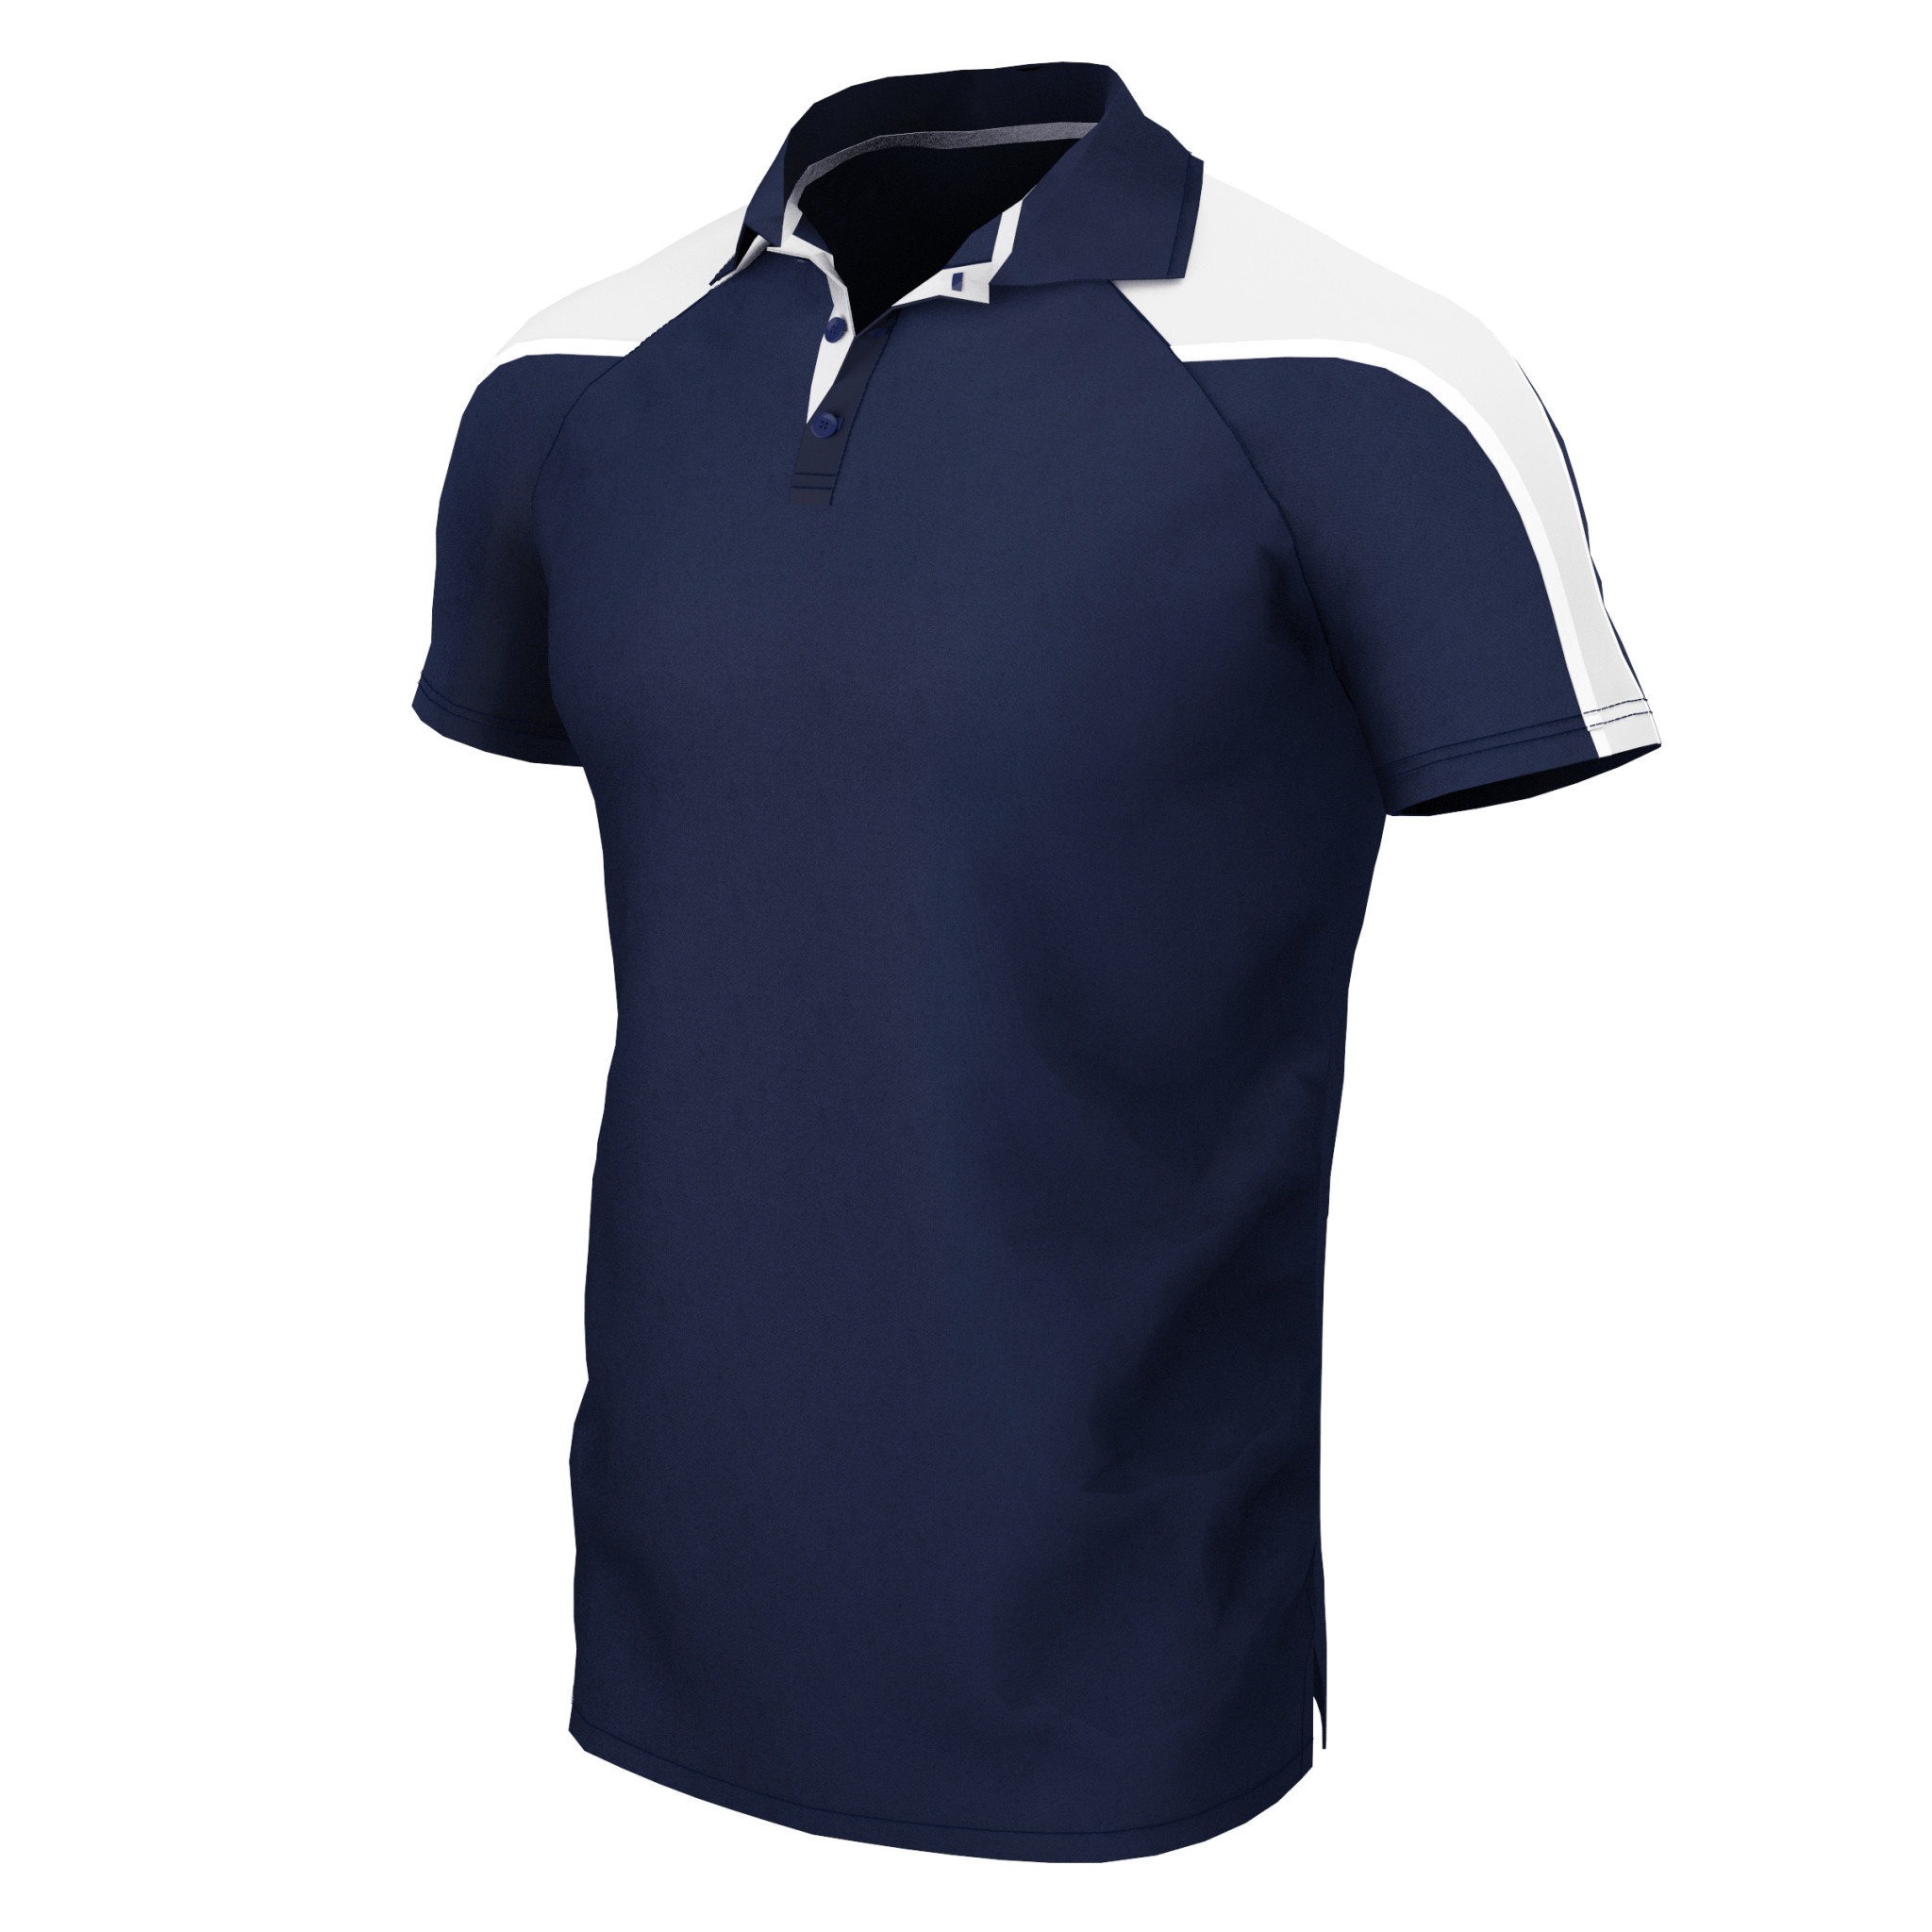 Youths iGen Polo Shirt